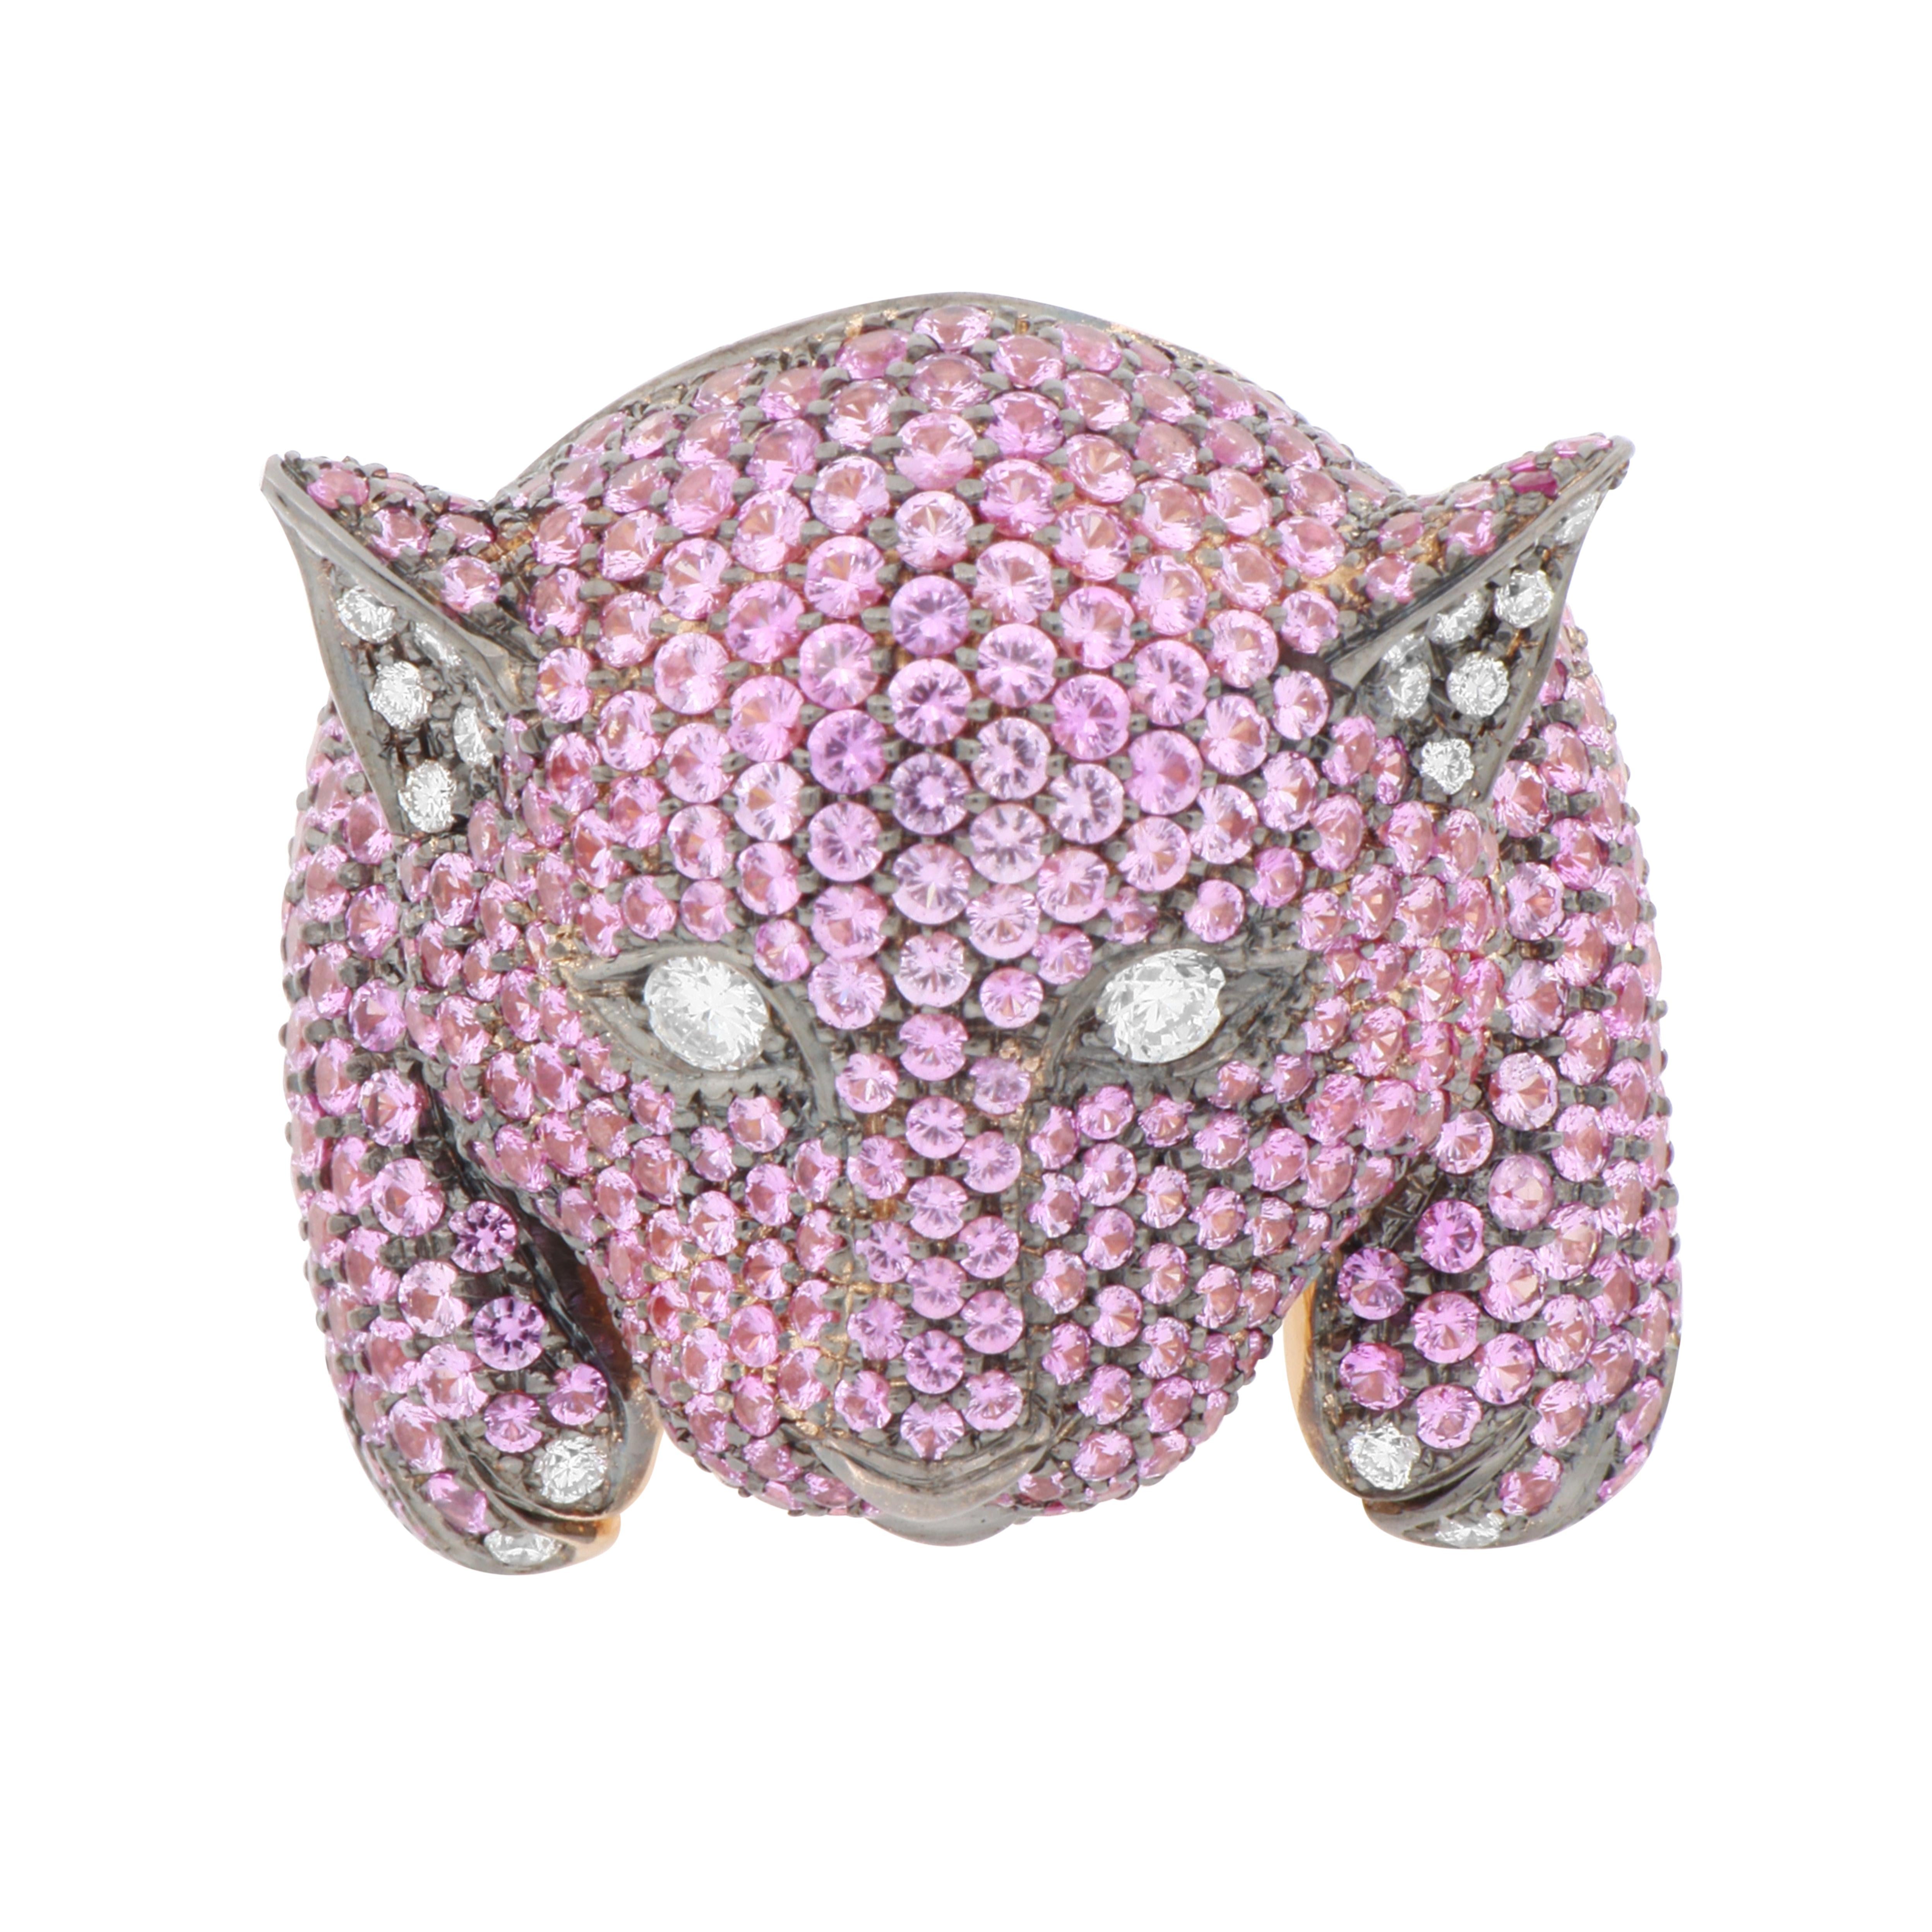 Inspired by the Pop Culture cartoon character, this original and funny ring is perfect if you want to stick out from the mass.
It is crafted in rose 18kt gold by Italian jewelry masters and it features a pink sapphire pavè surface for the head of